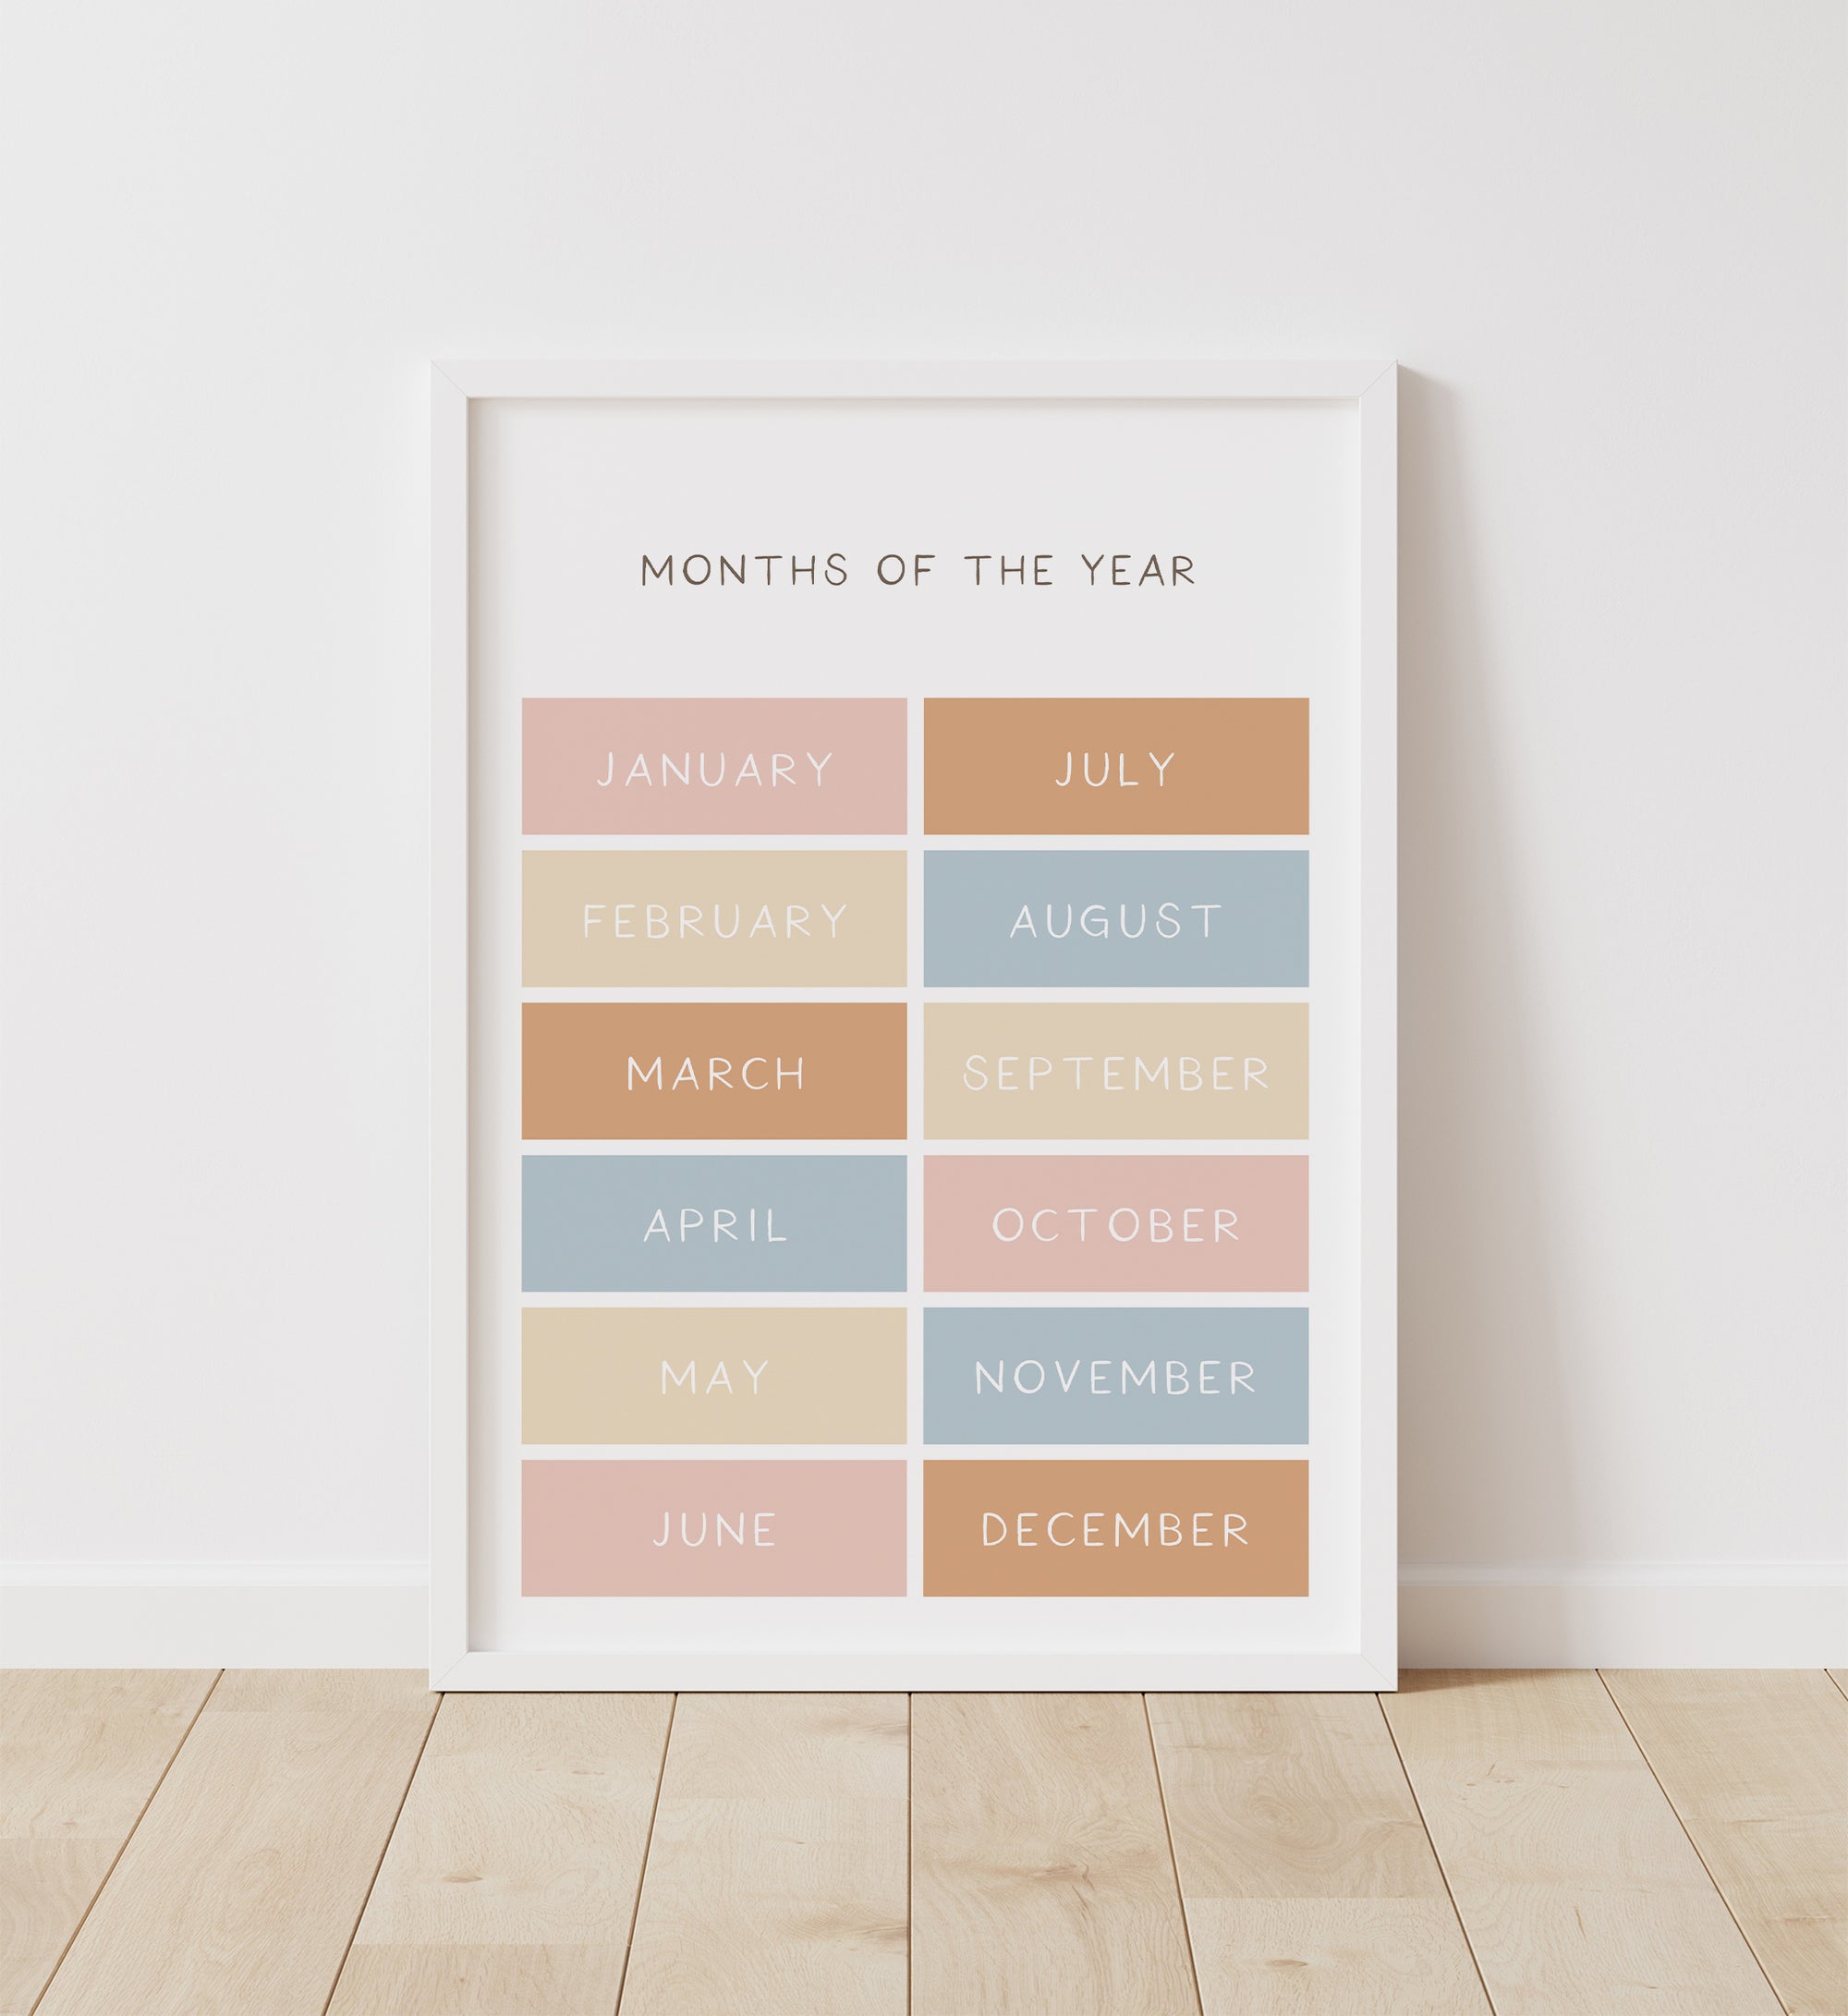 Months of the Year Print - BHCP